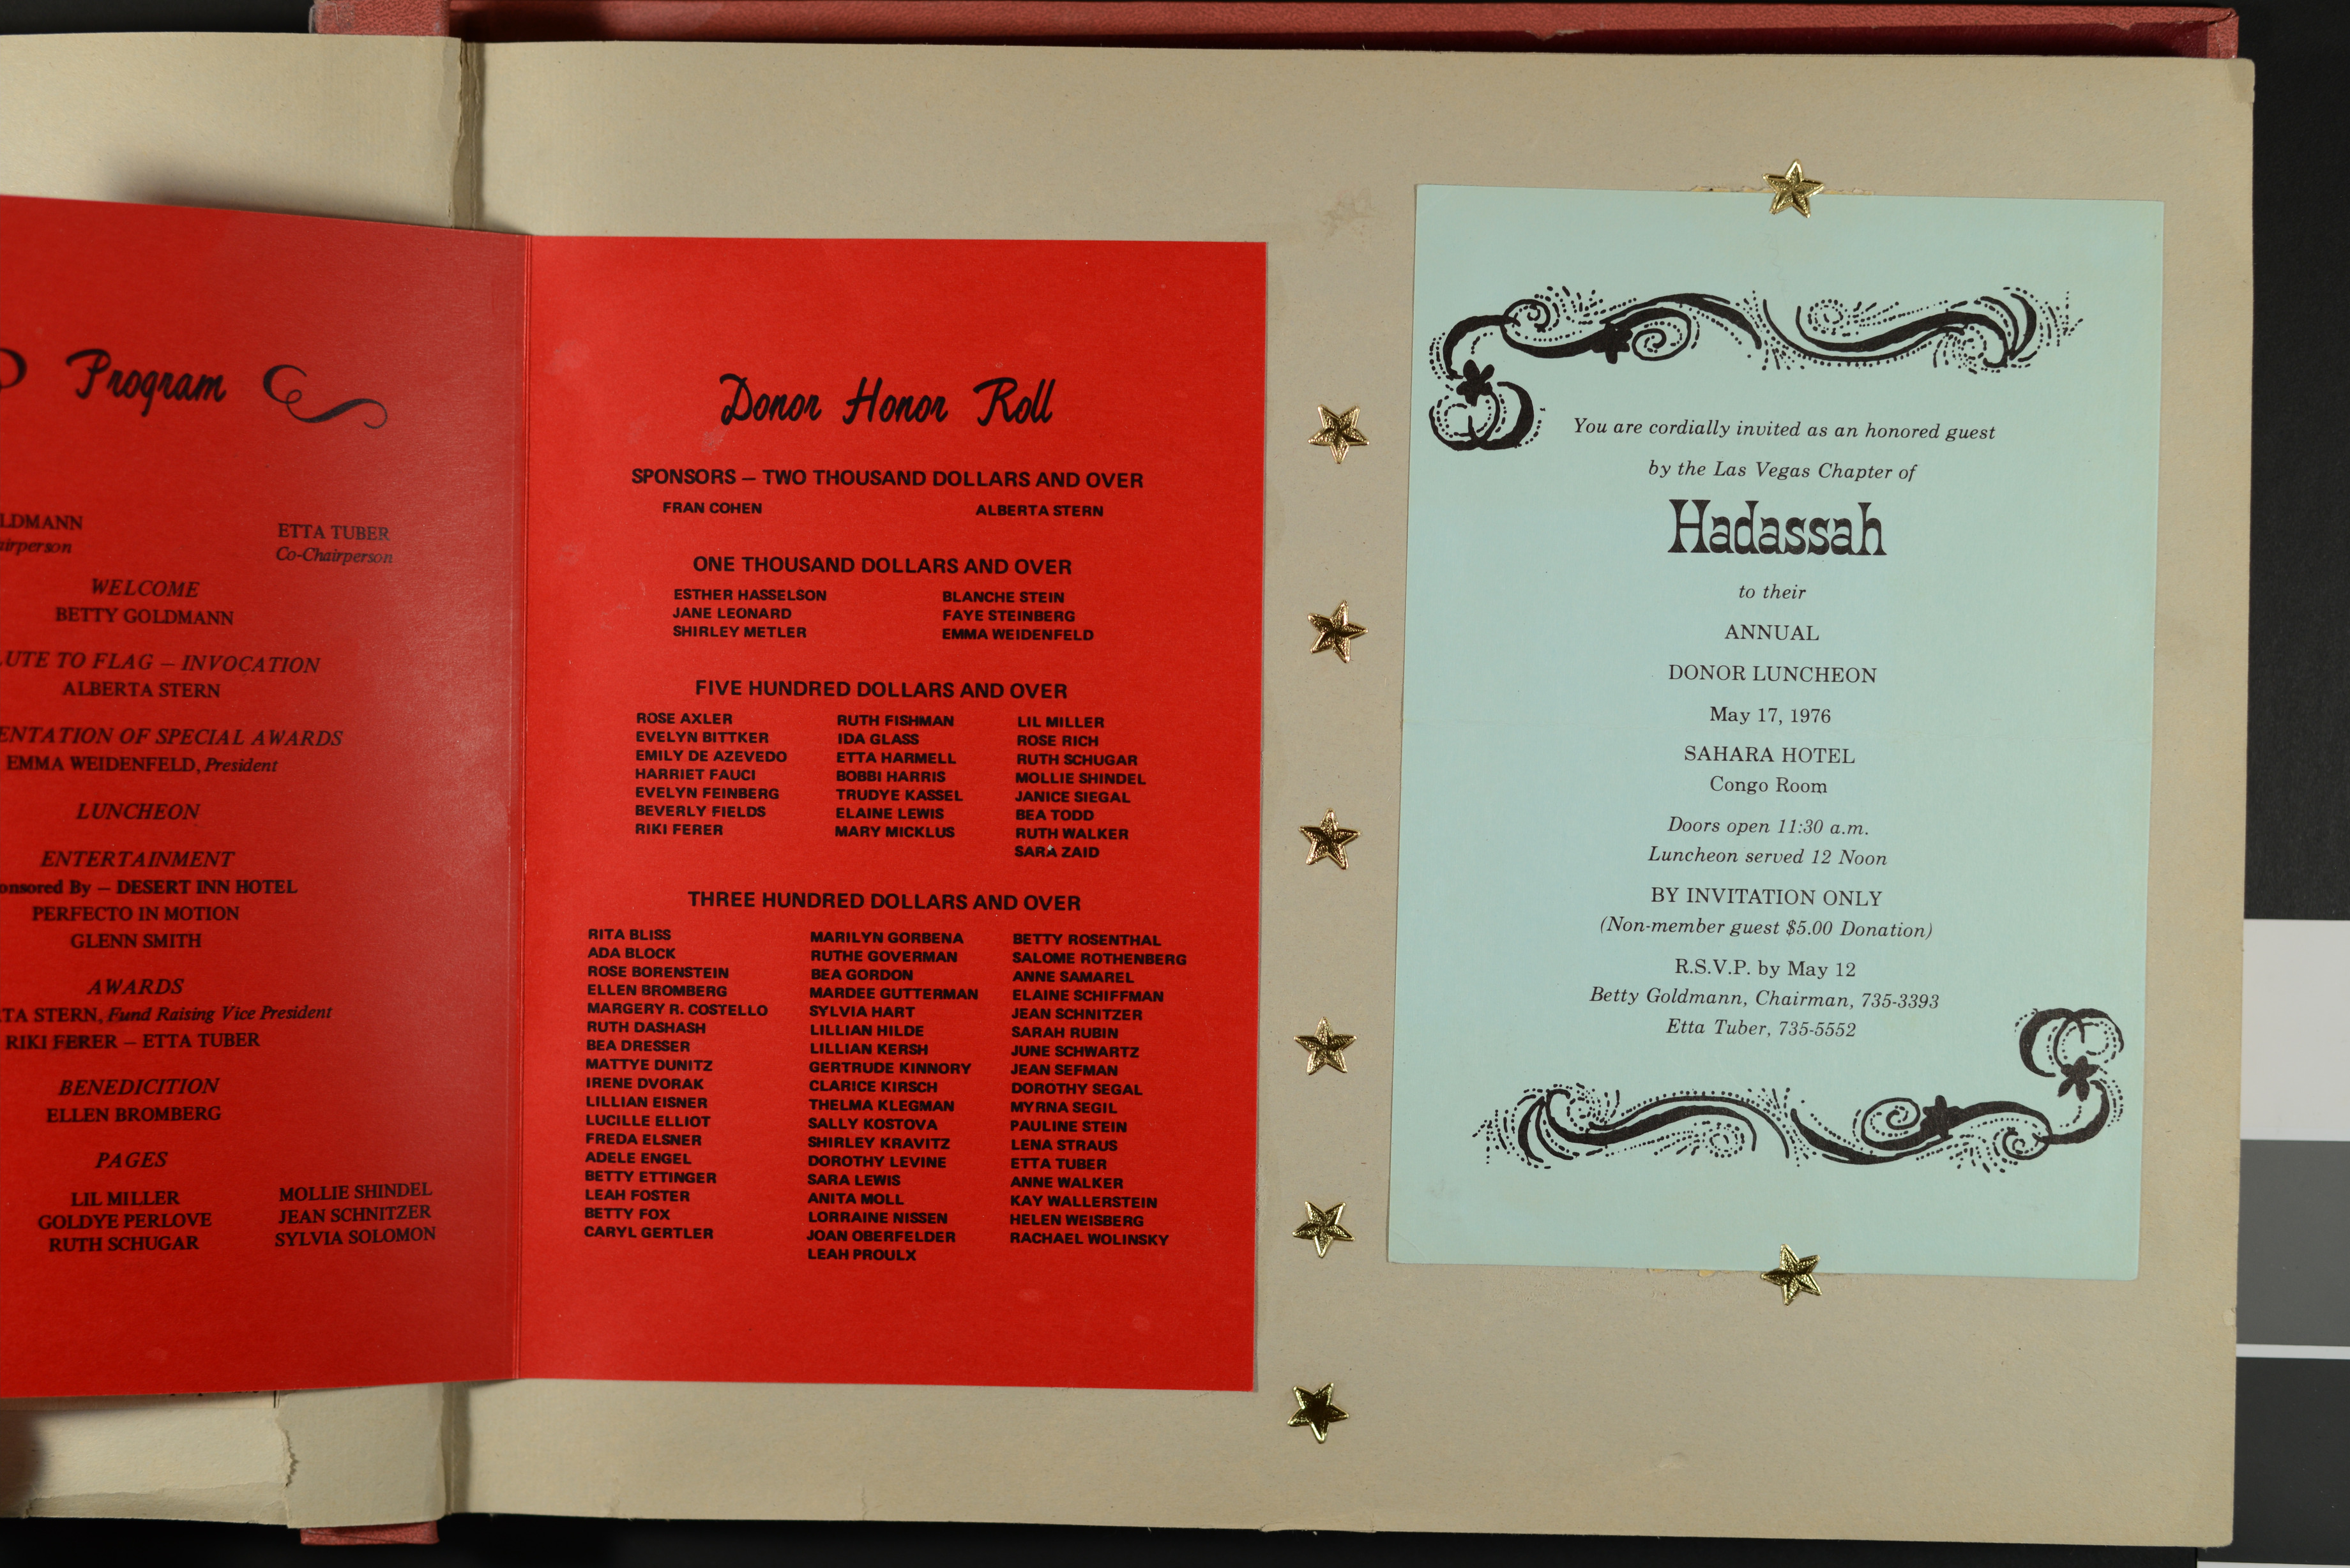 Program, Donor honor roll listing